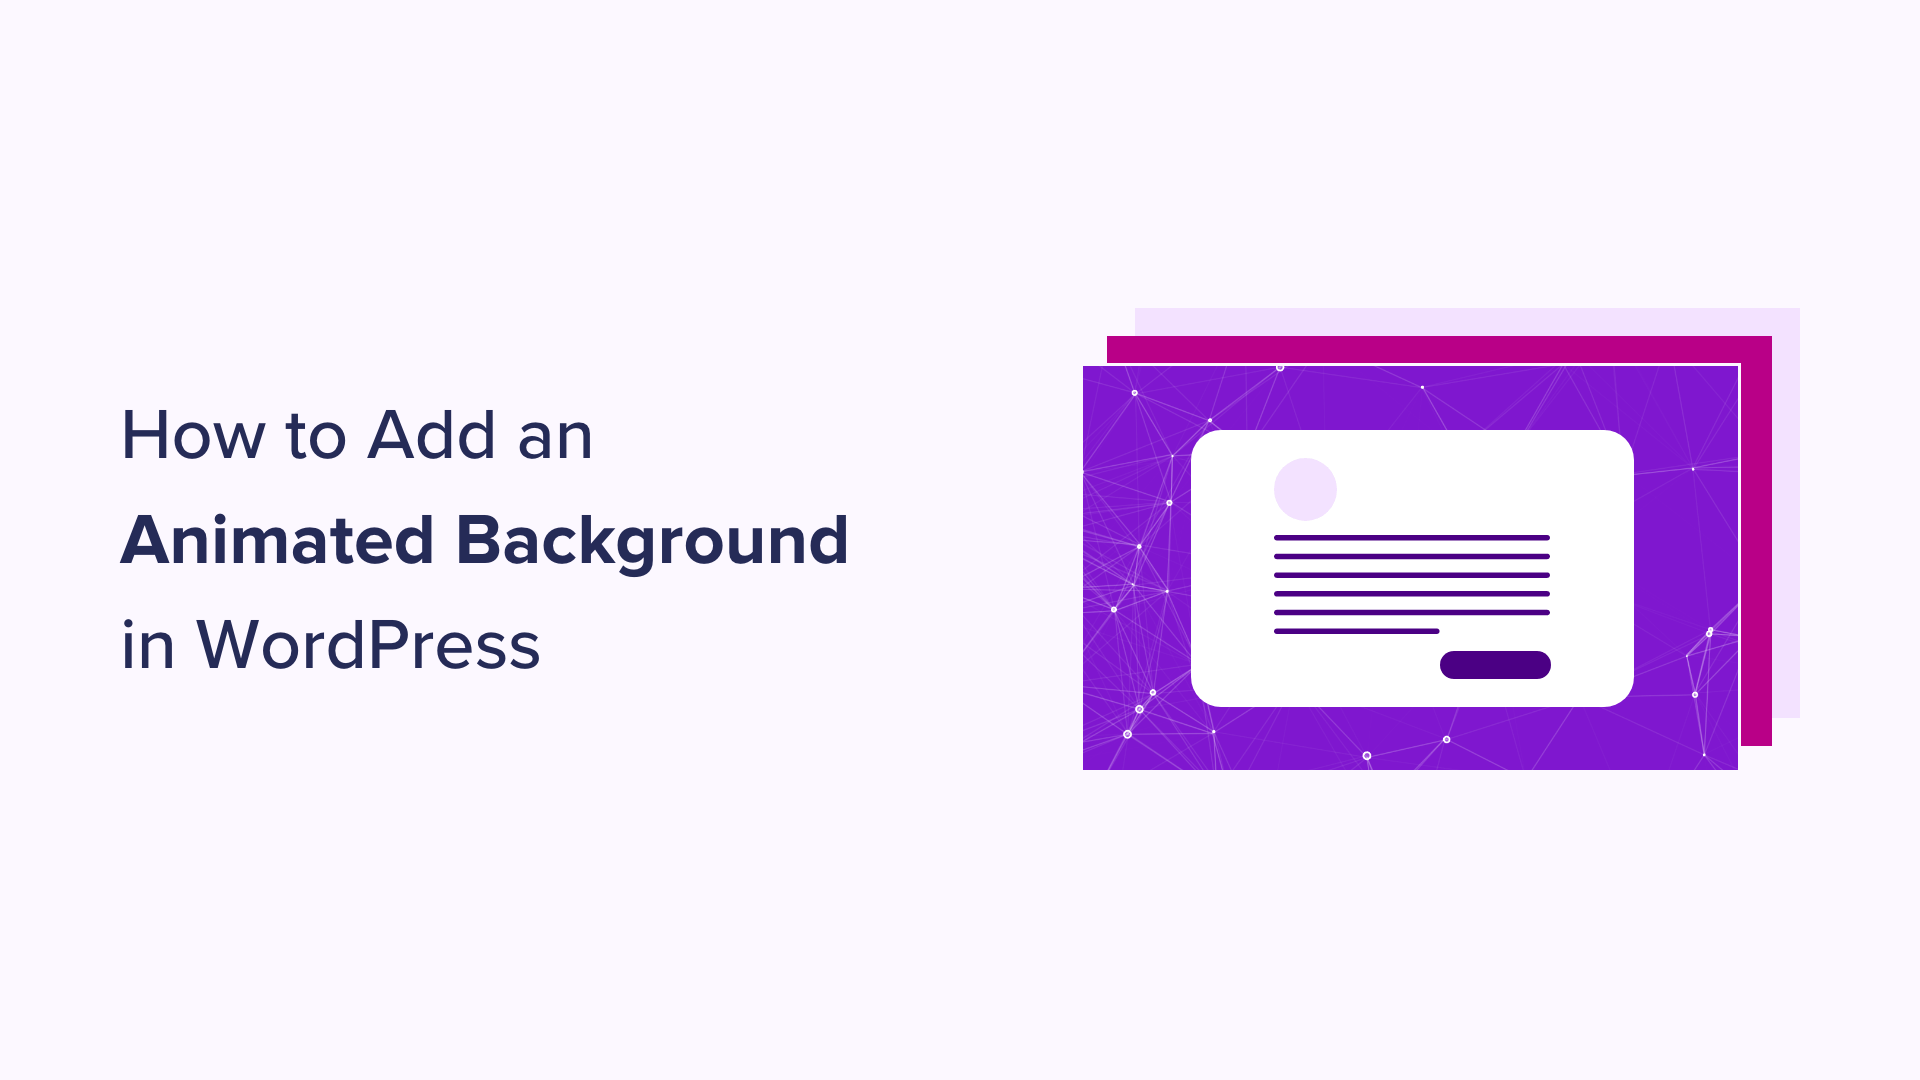 How to Add an Animated Background in WordPress (2 Methods)